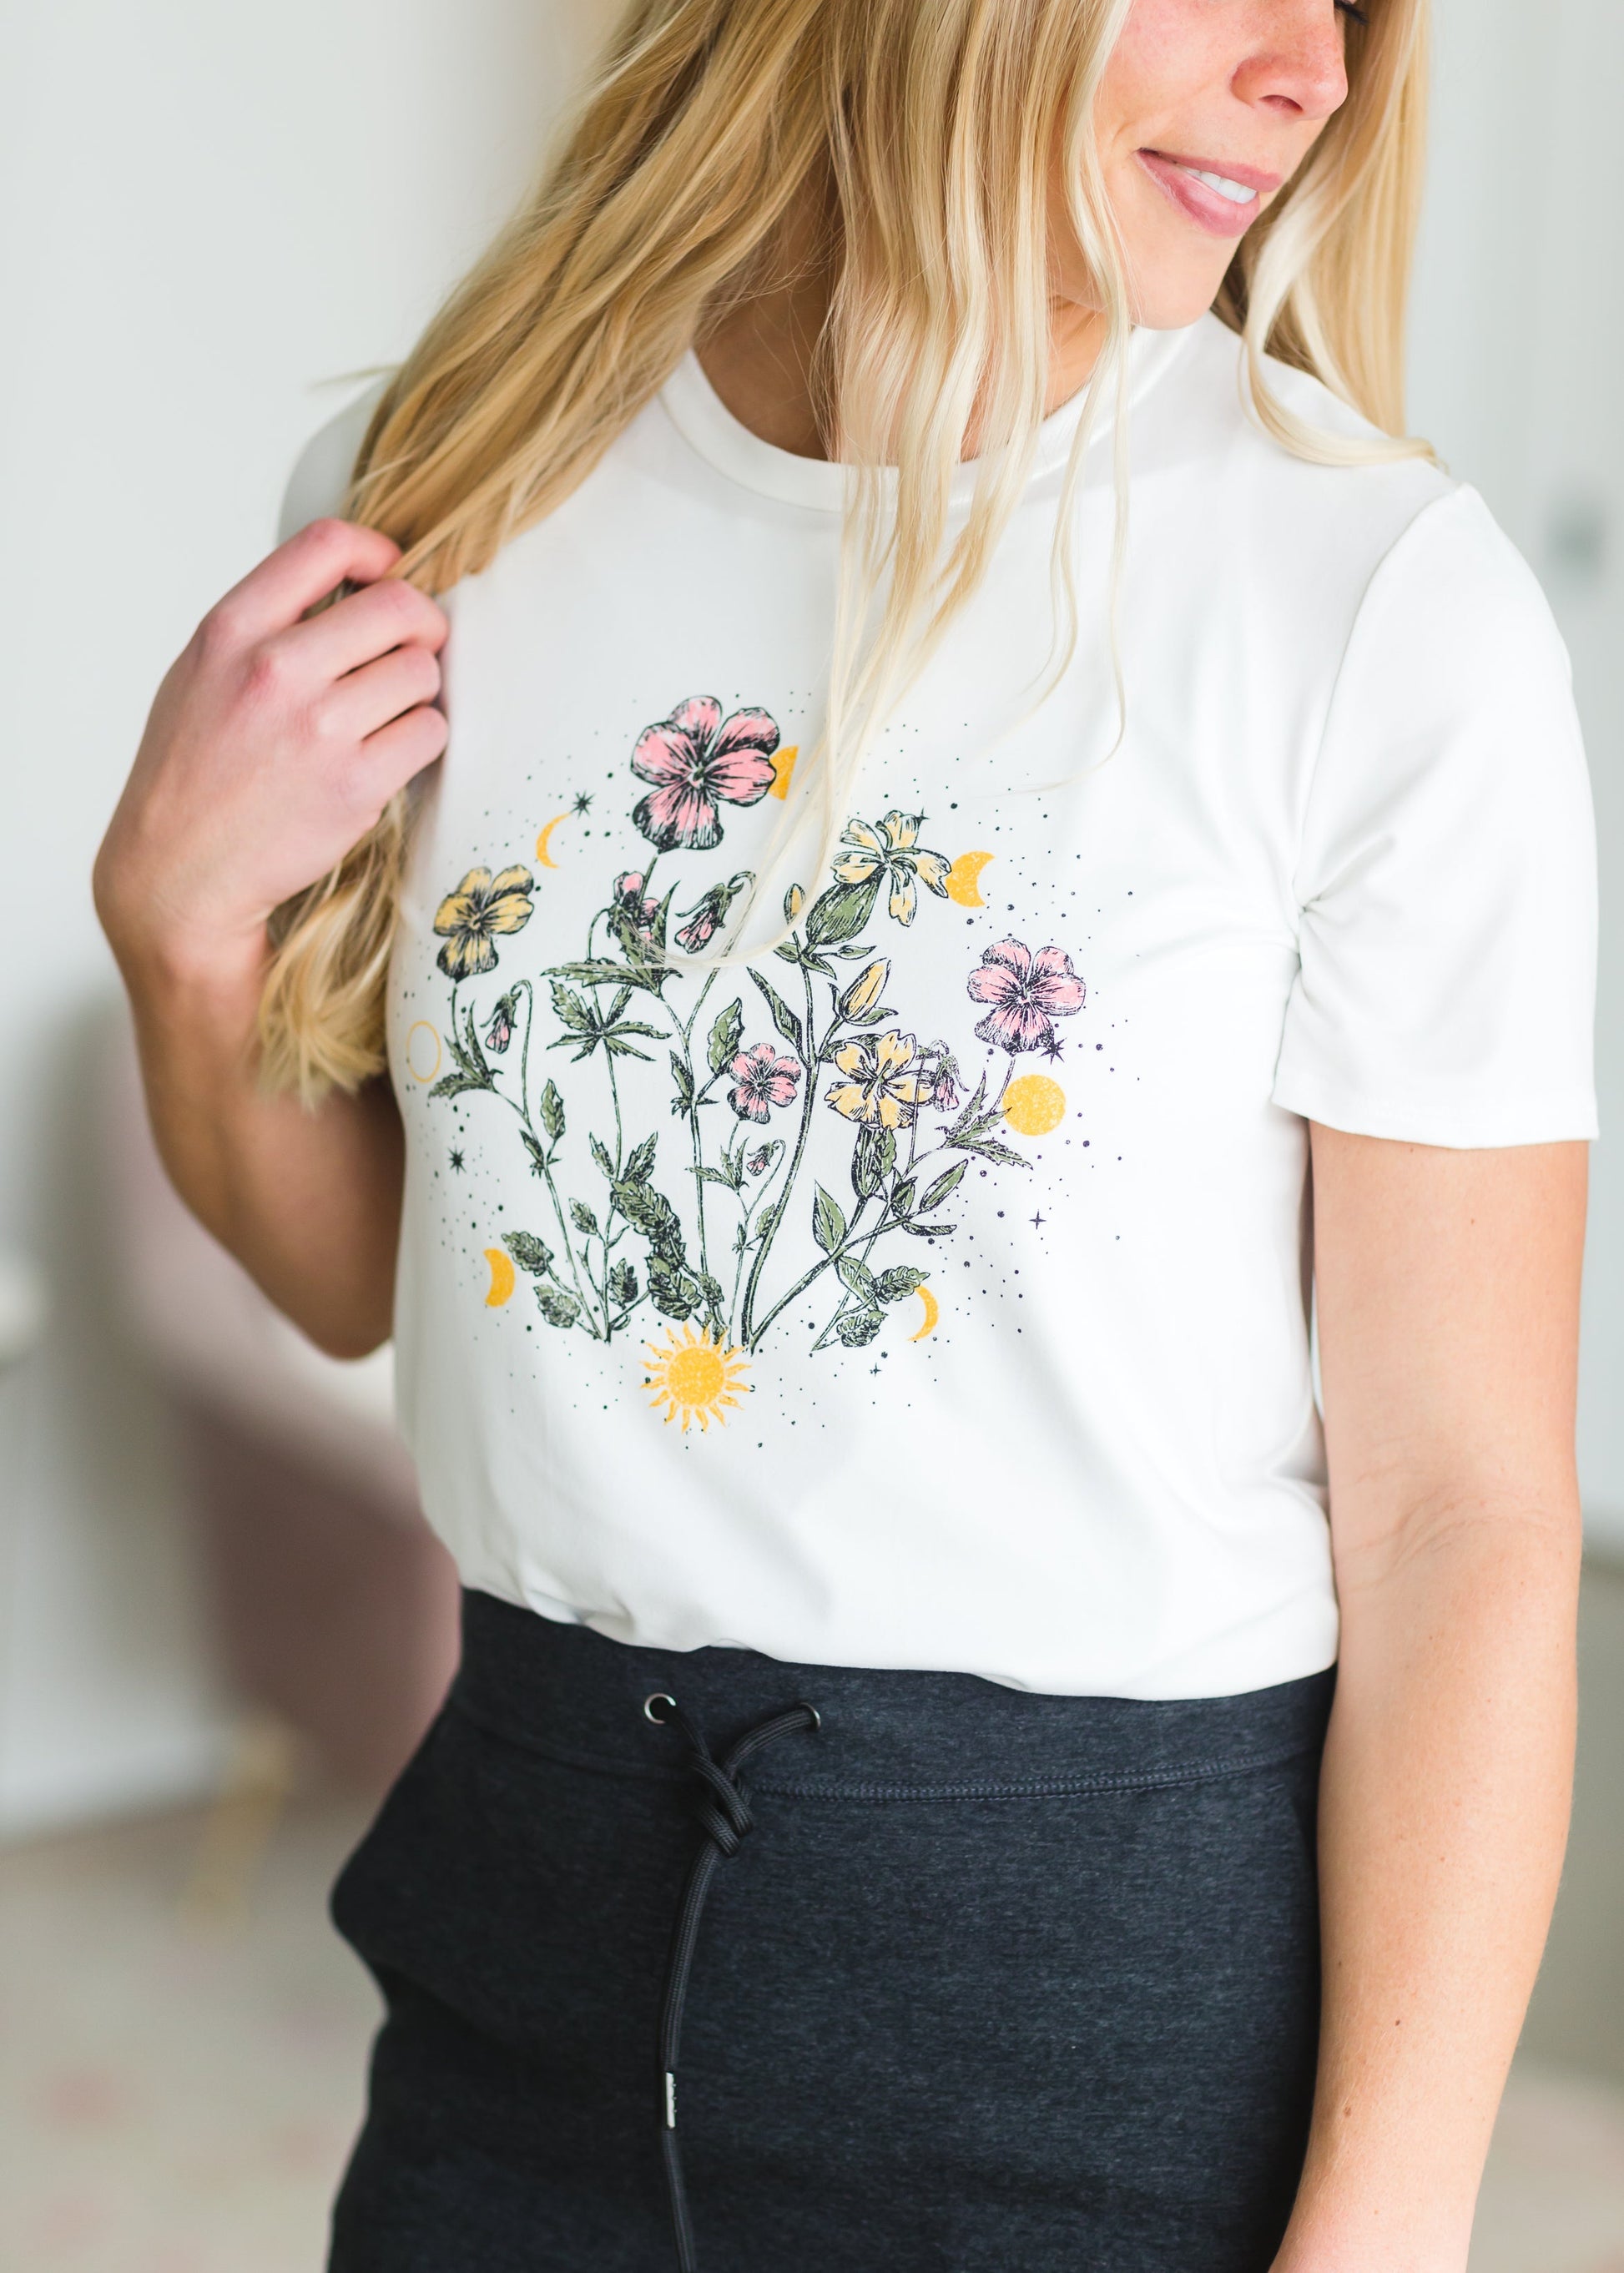 Sun + Moon Floral Graphic Tee - FINAL SALE Tops